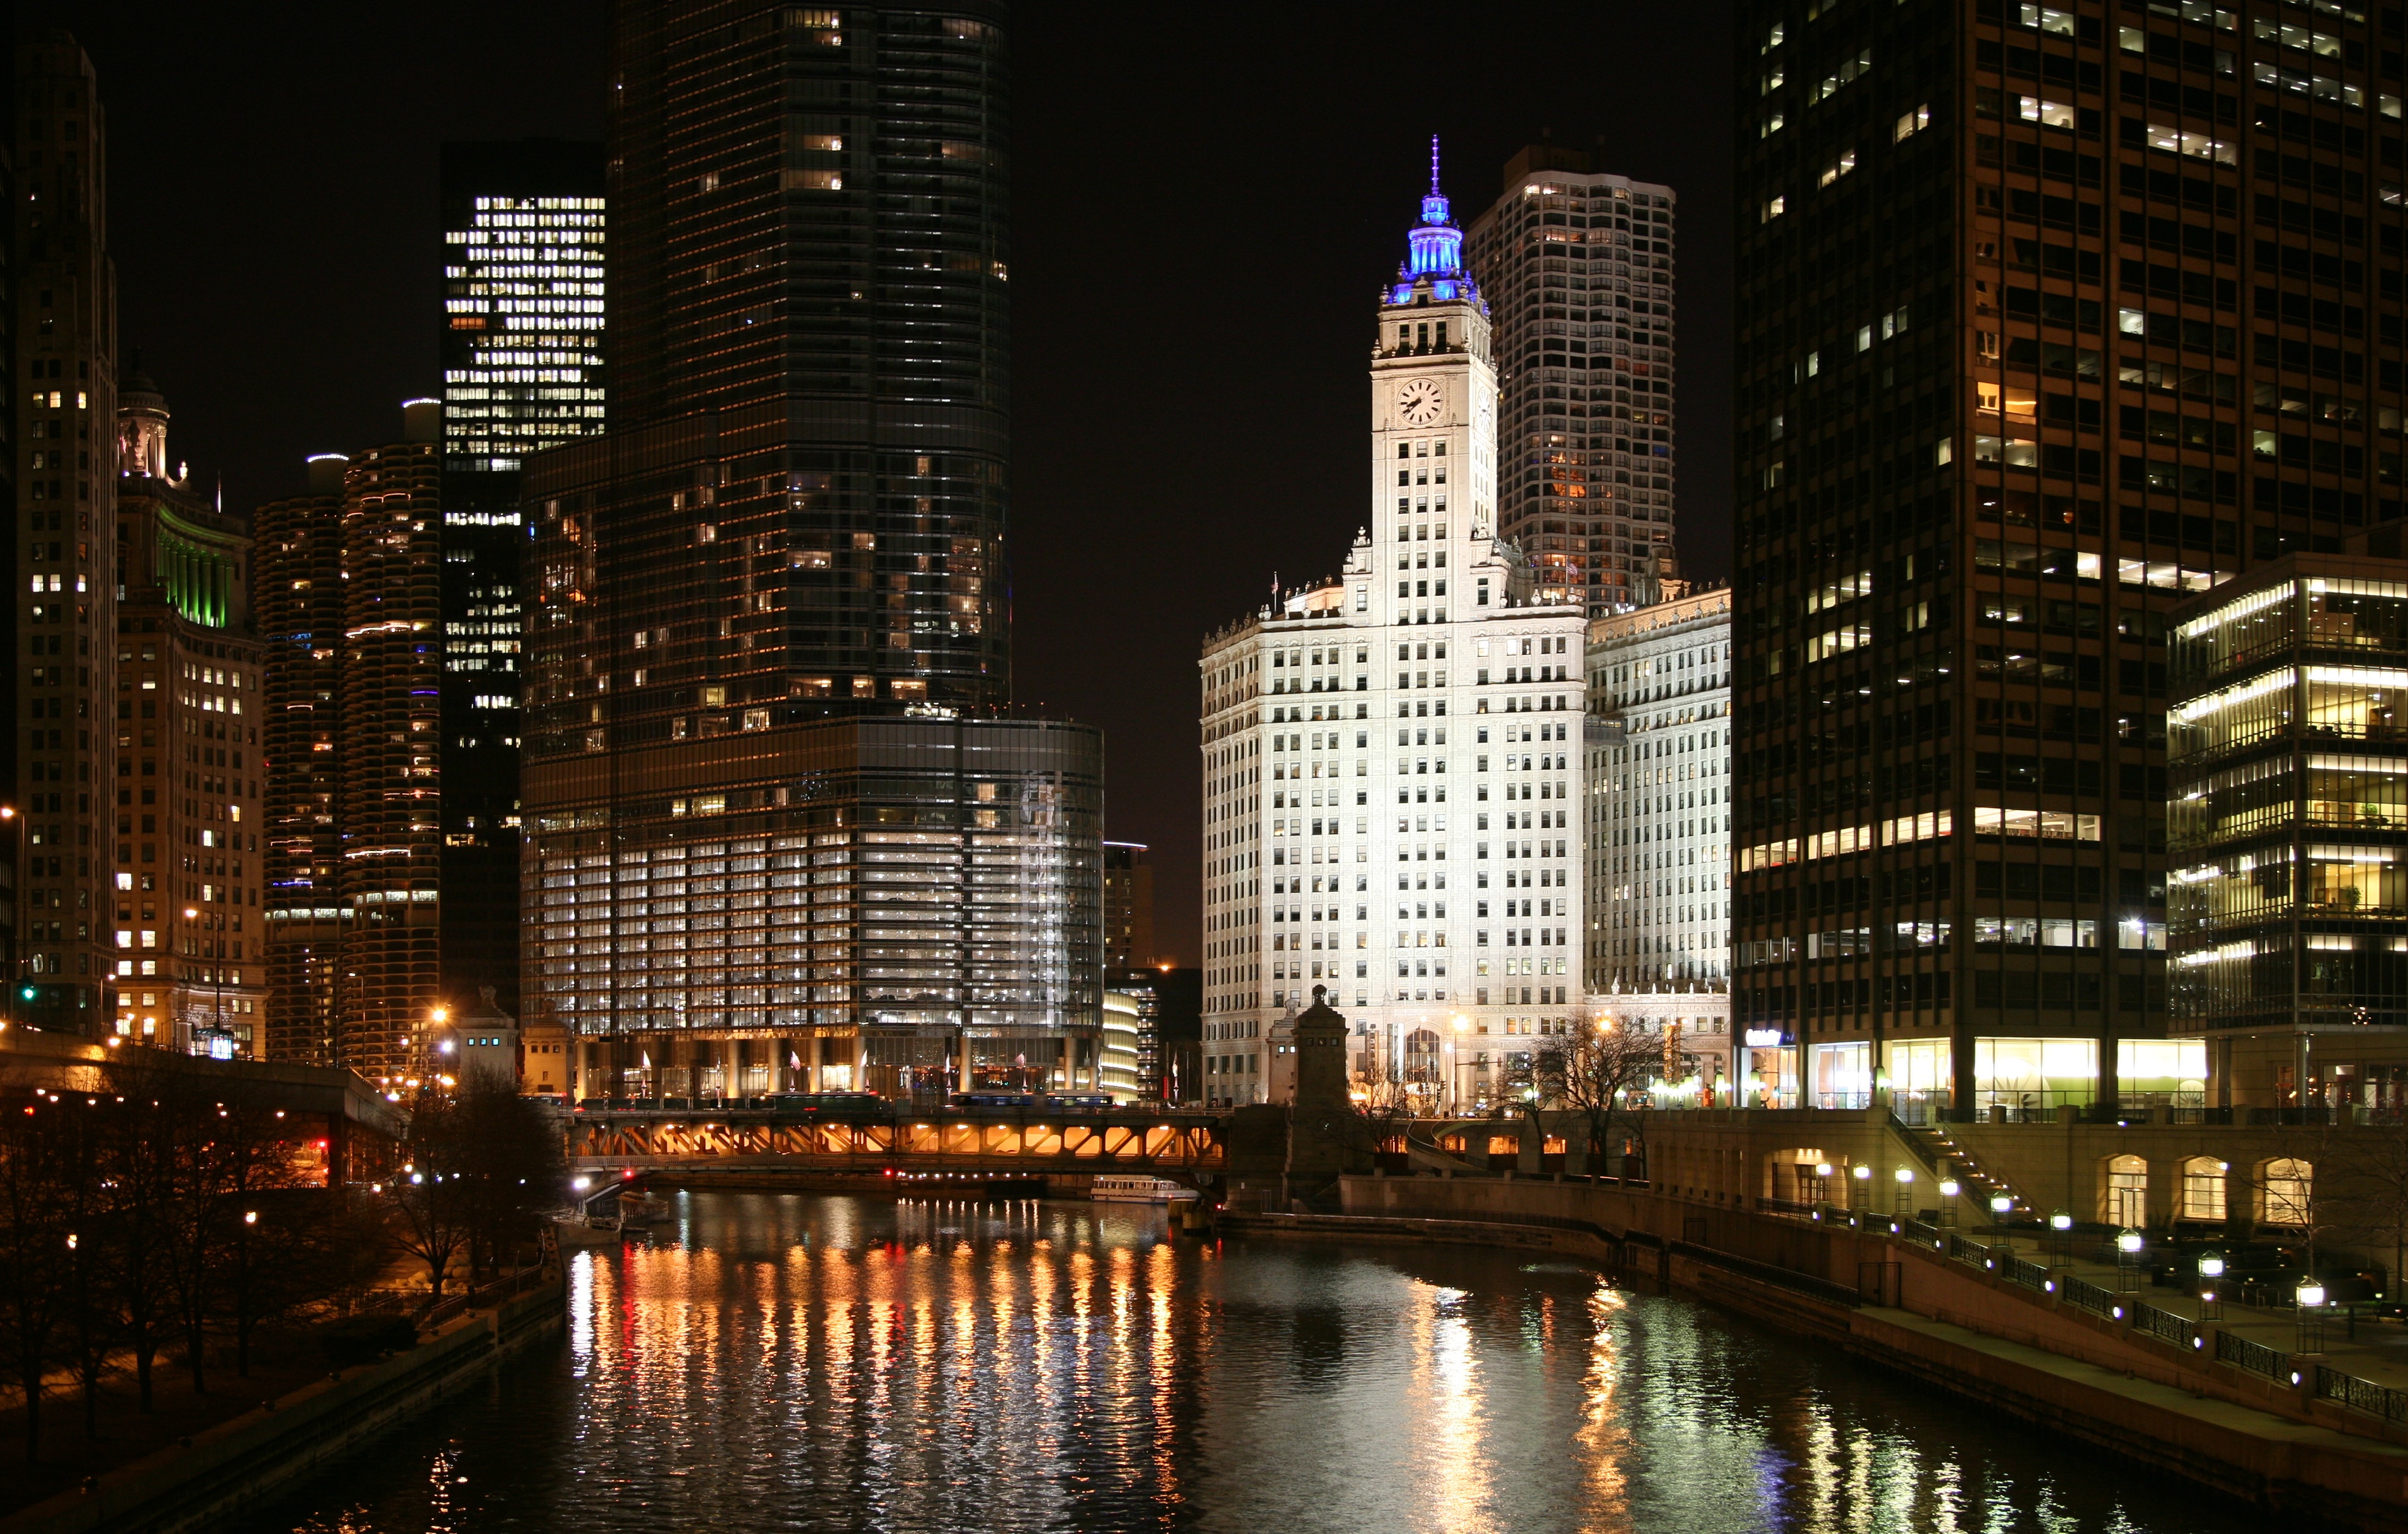 The Wrigley Building lit up at night